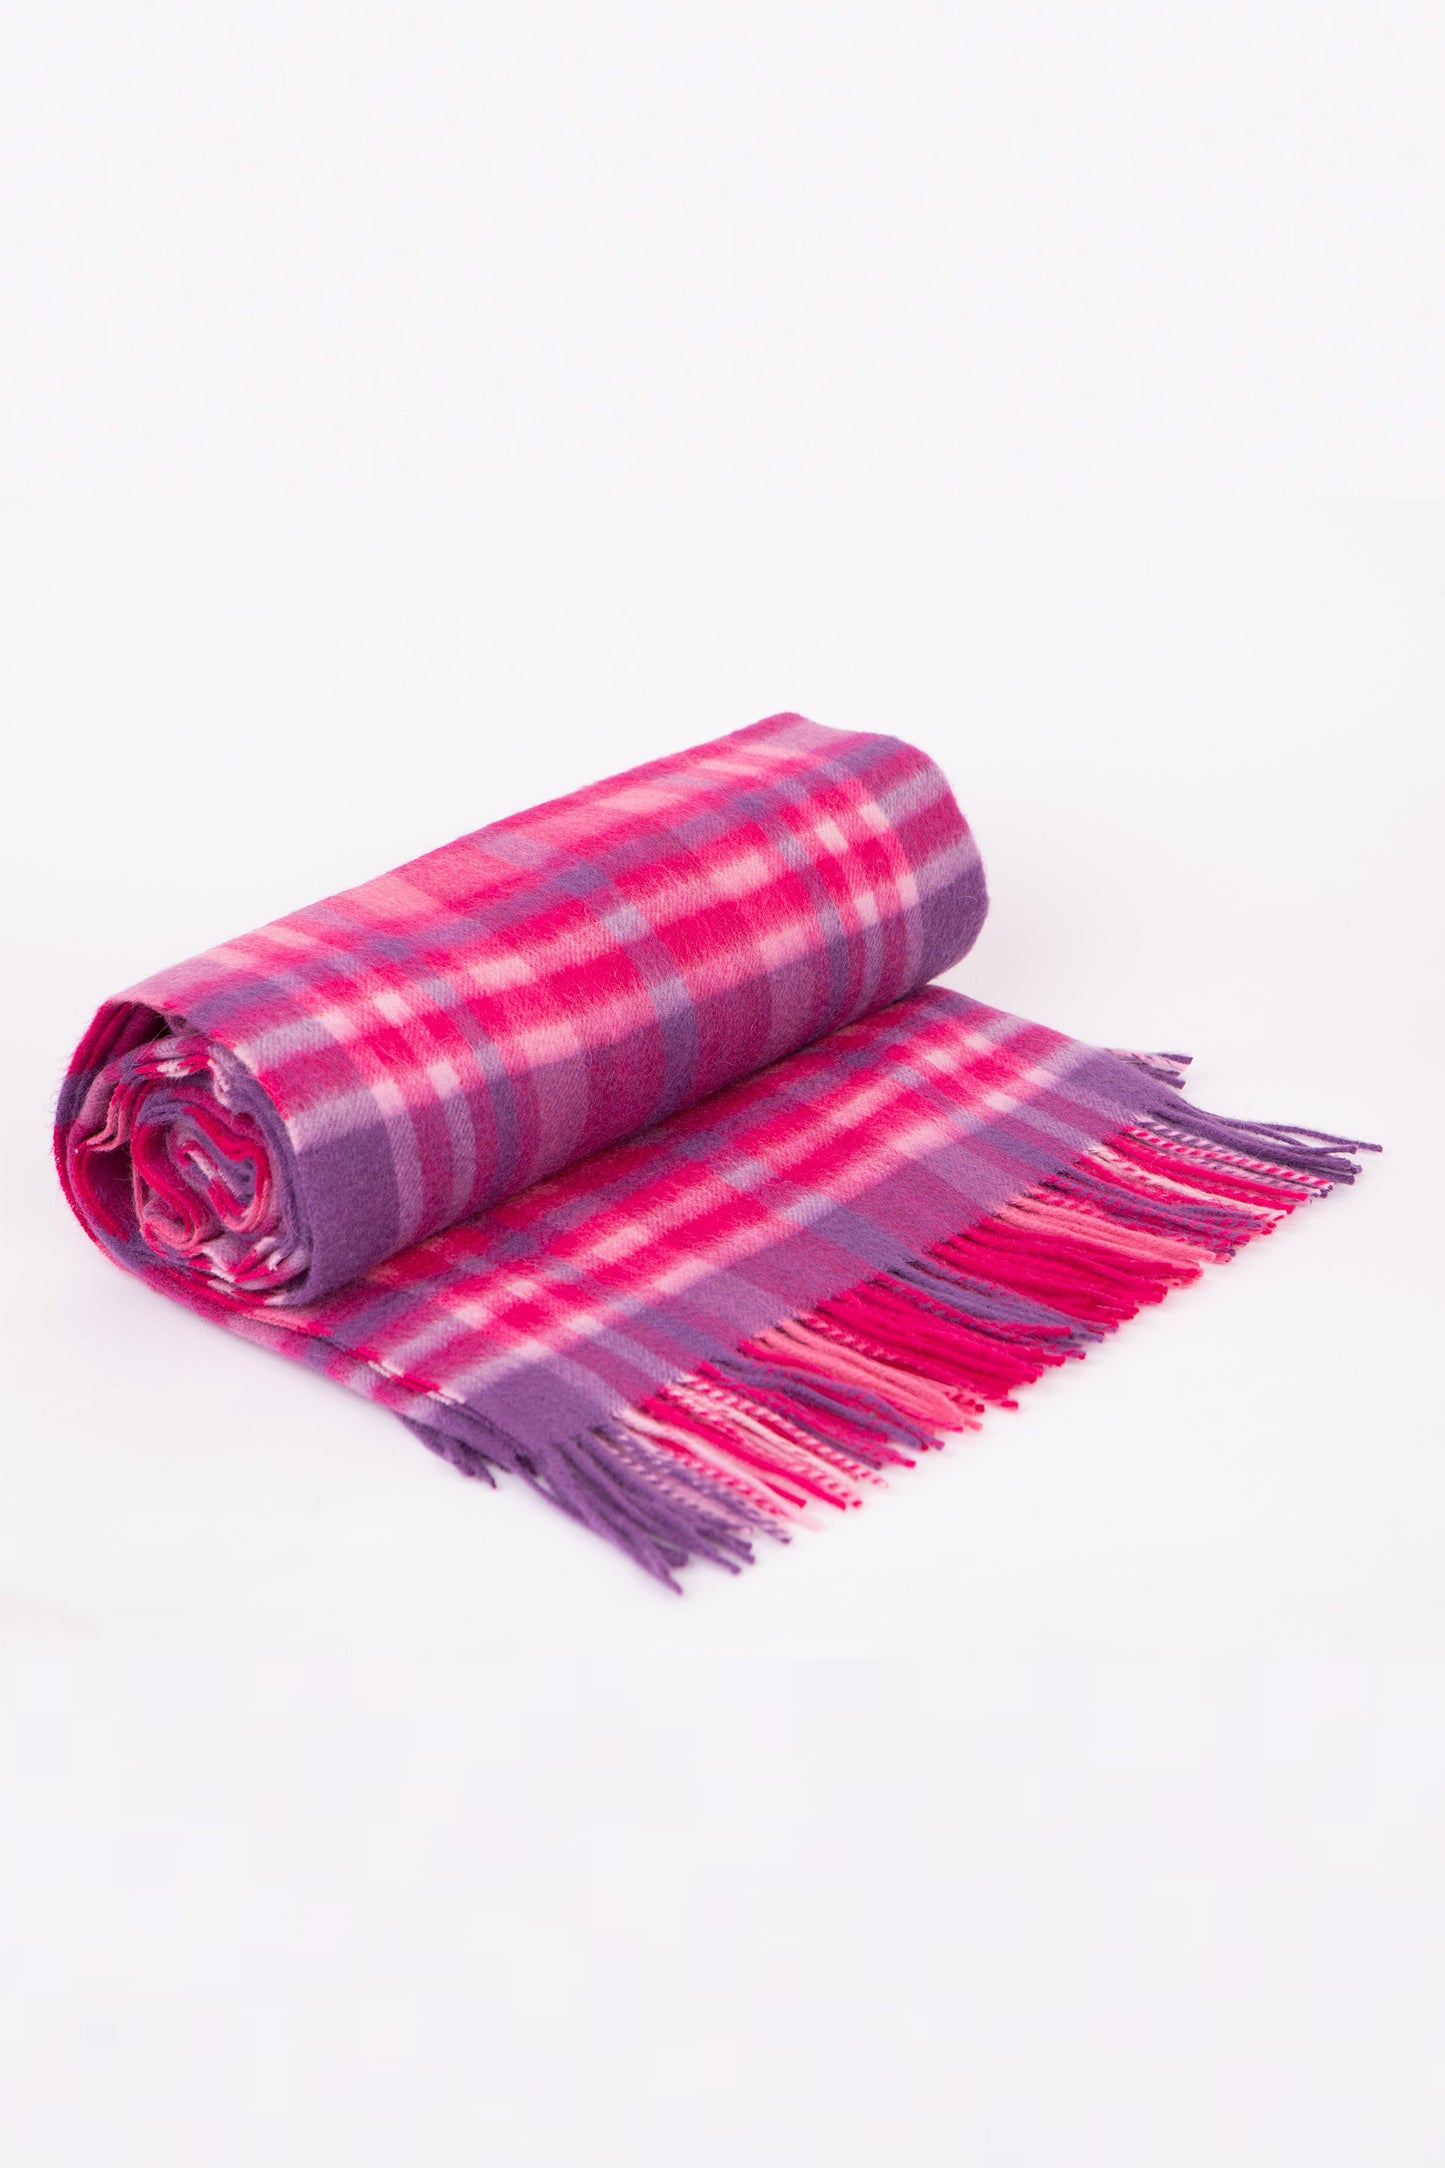 Lambswool Throw - Purple Pink Exploded Check